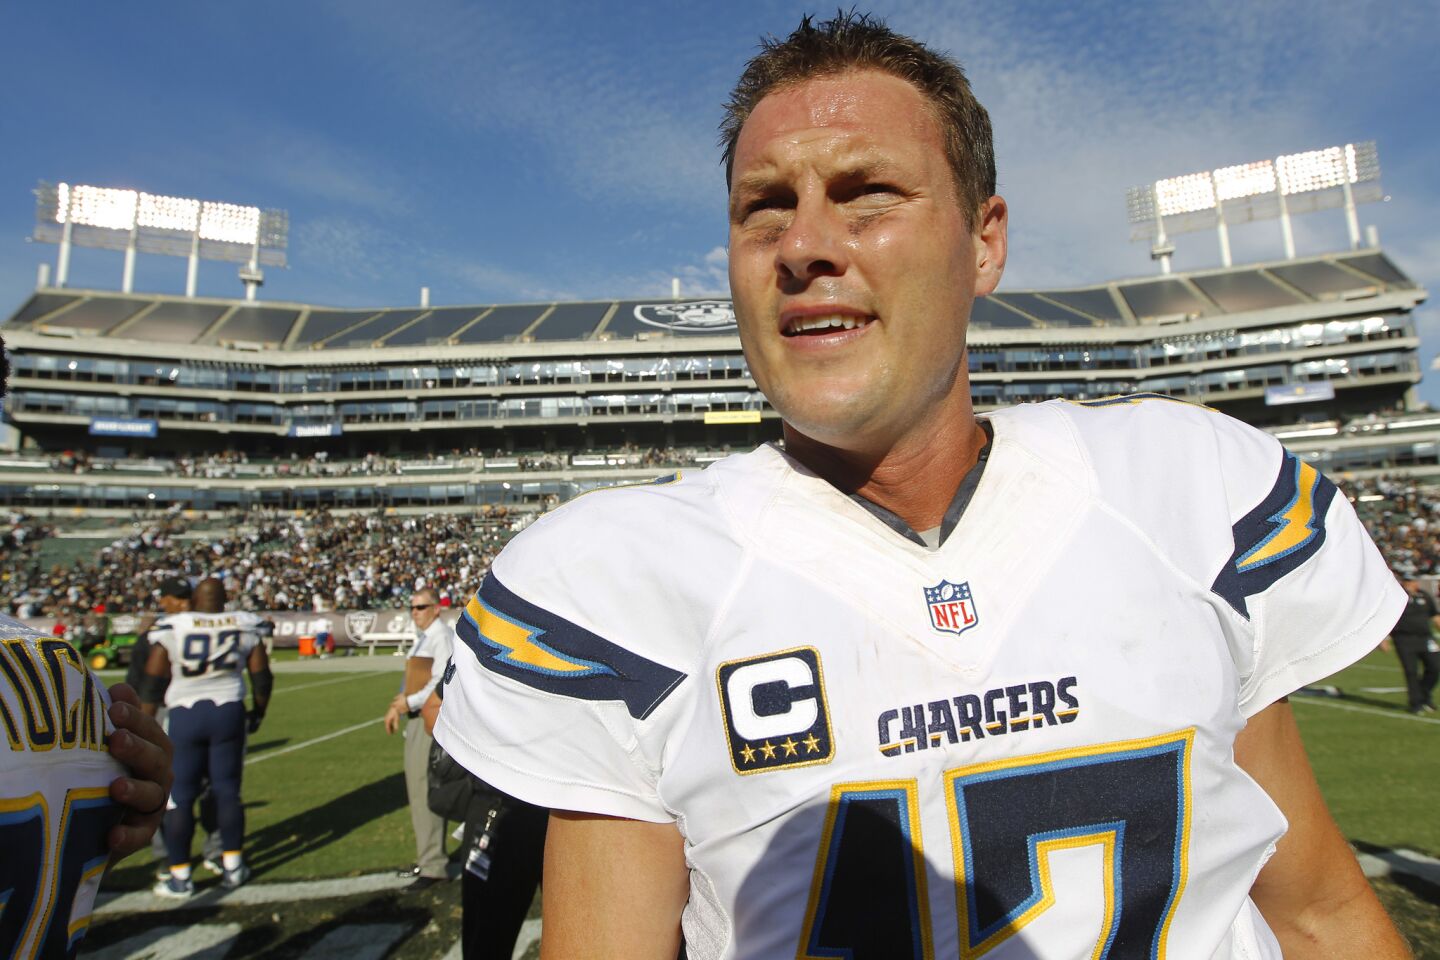 San Diego Chargers Philip Rivers walks of the field after a 34-31 loss to the Raiders in Oakland on Oct. 9, 2016. (Photo by K.C. Alfred/The San Diego Union-Tribune)